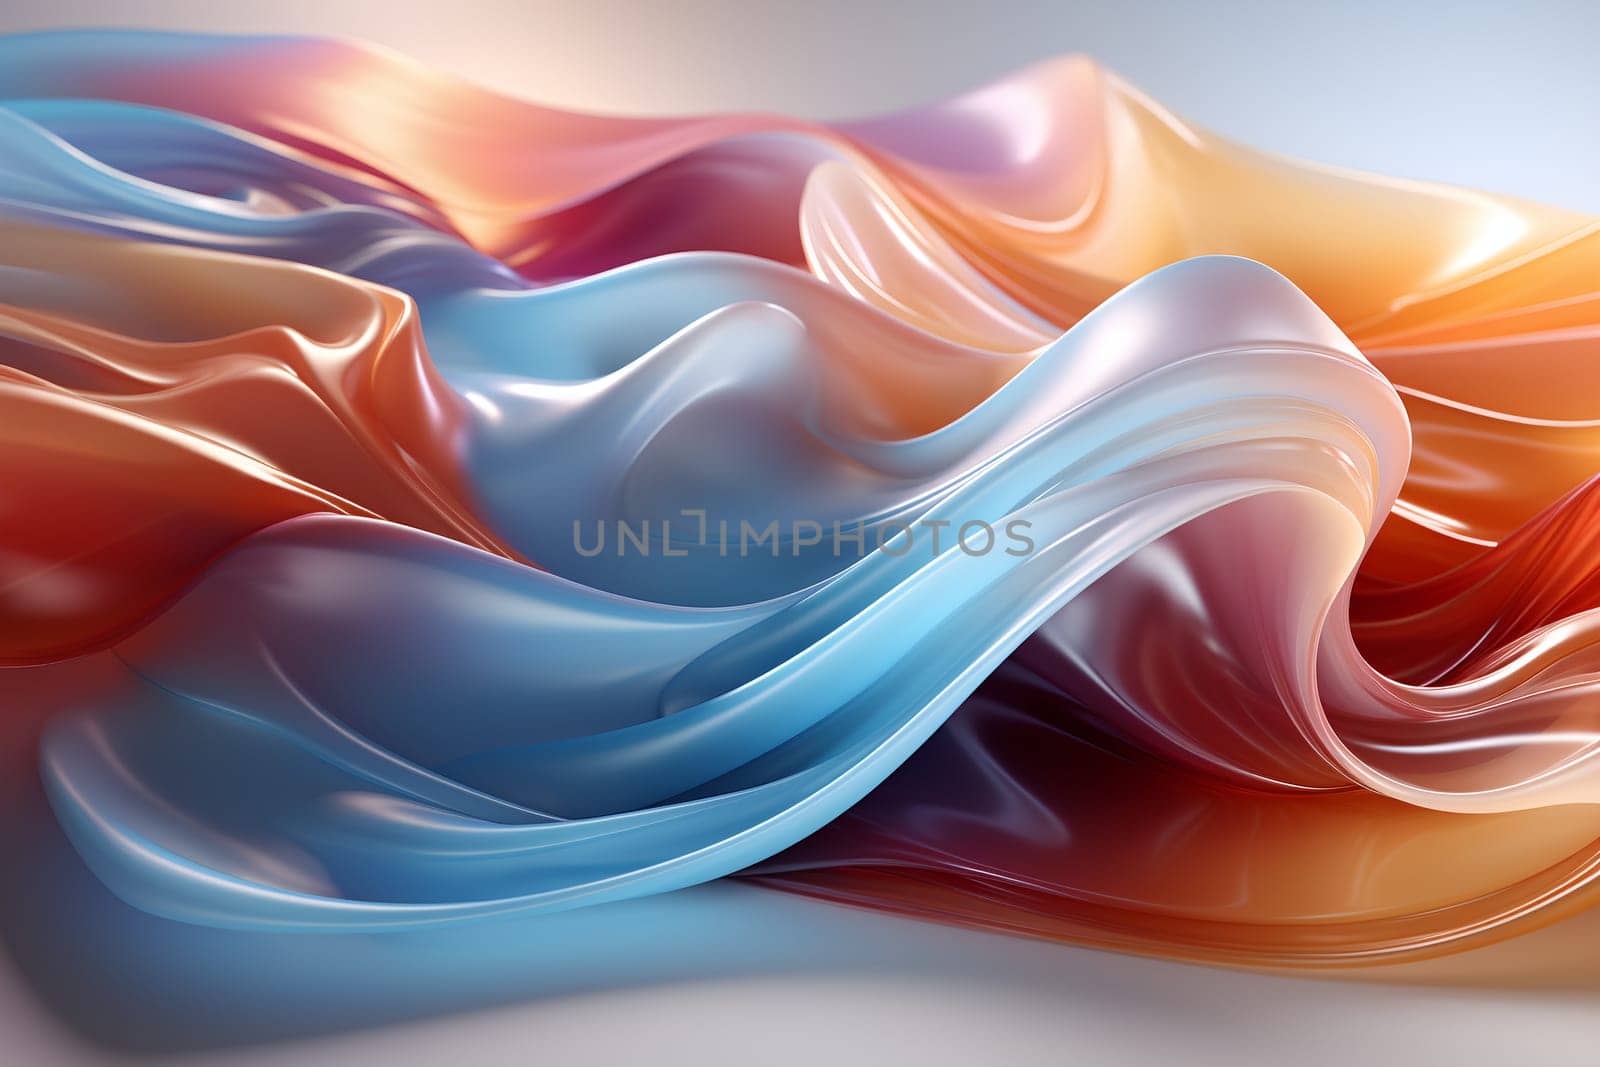 Abstract Fluid Art Design With Blue and Orange Hues by chrisroll